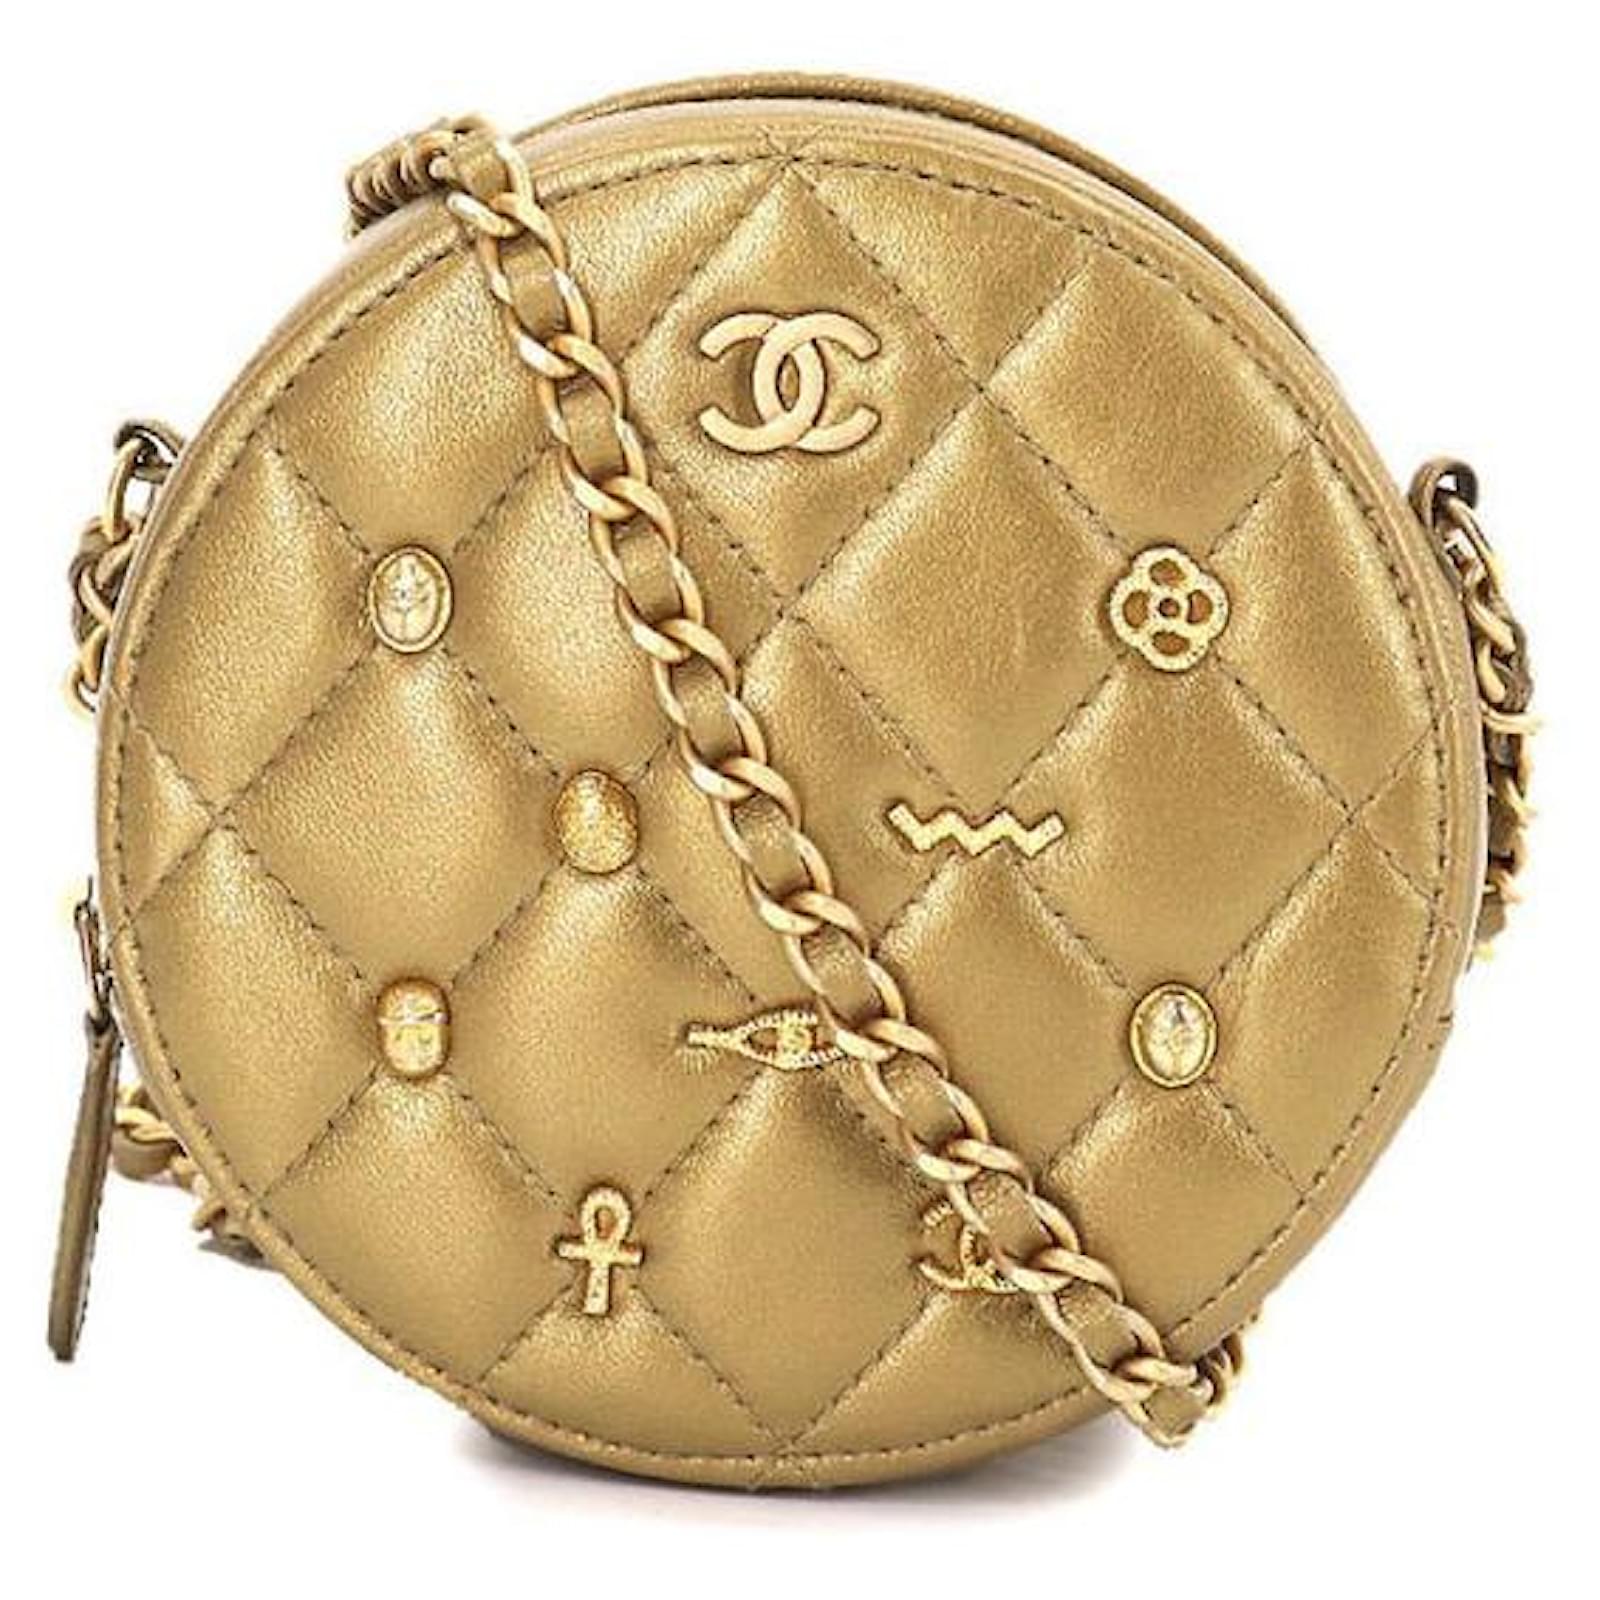 Chanel 19a, 2019 Fall Gold Leather Amulet Symbols Paris Egypt New York  Métiers De Arts Limited Edition Round Crossbody Bag. Like new In excellent  condition with box. Golden Gold hardware ref.915597 